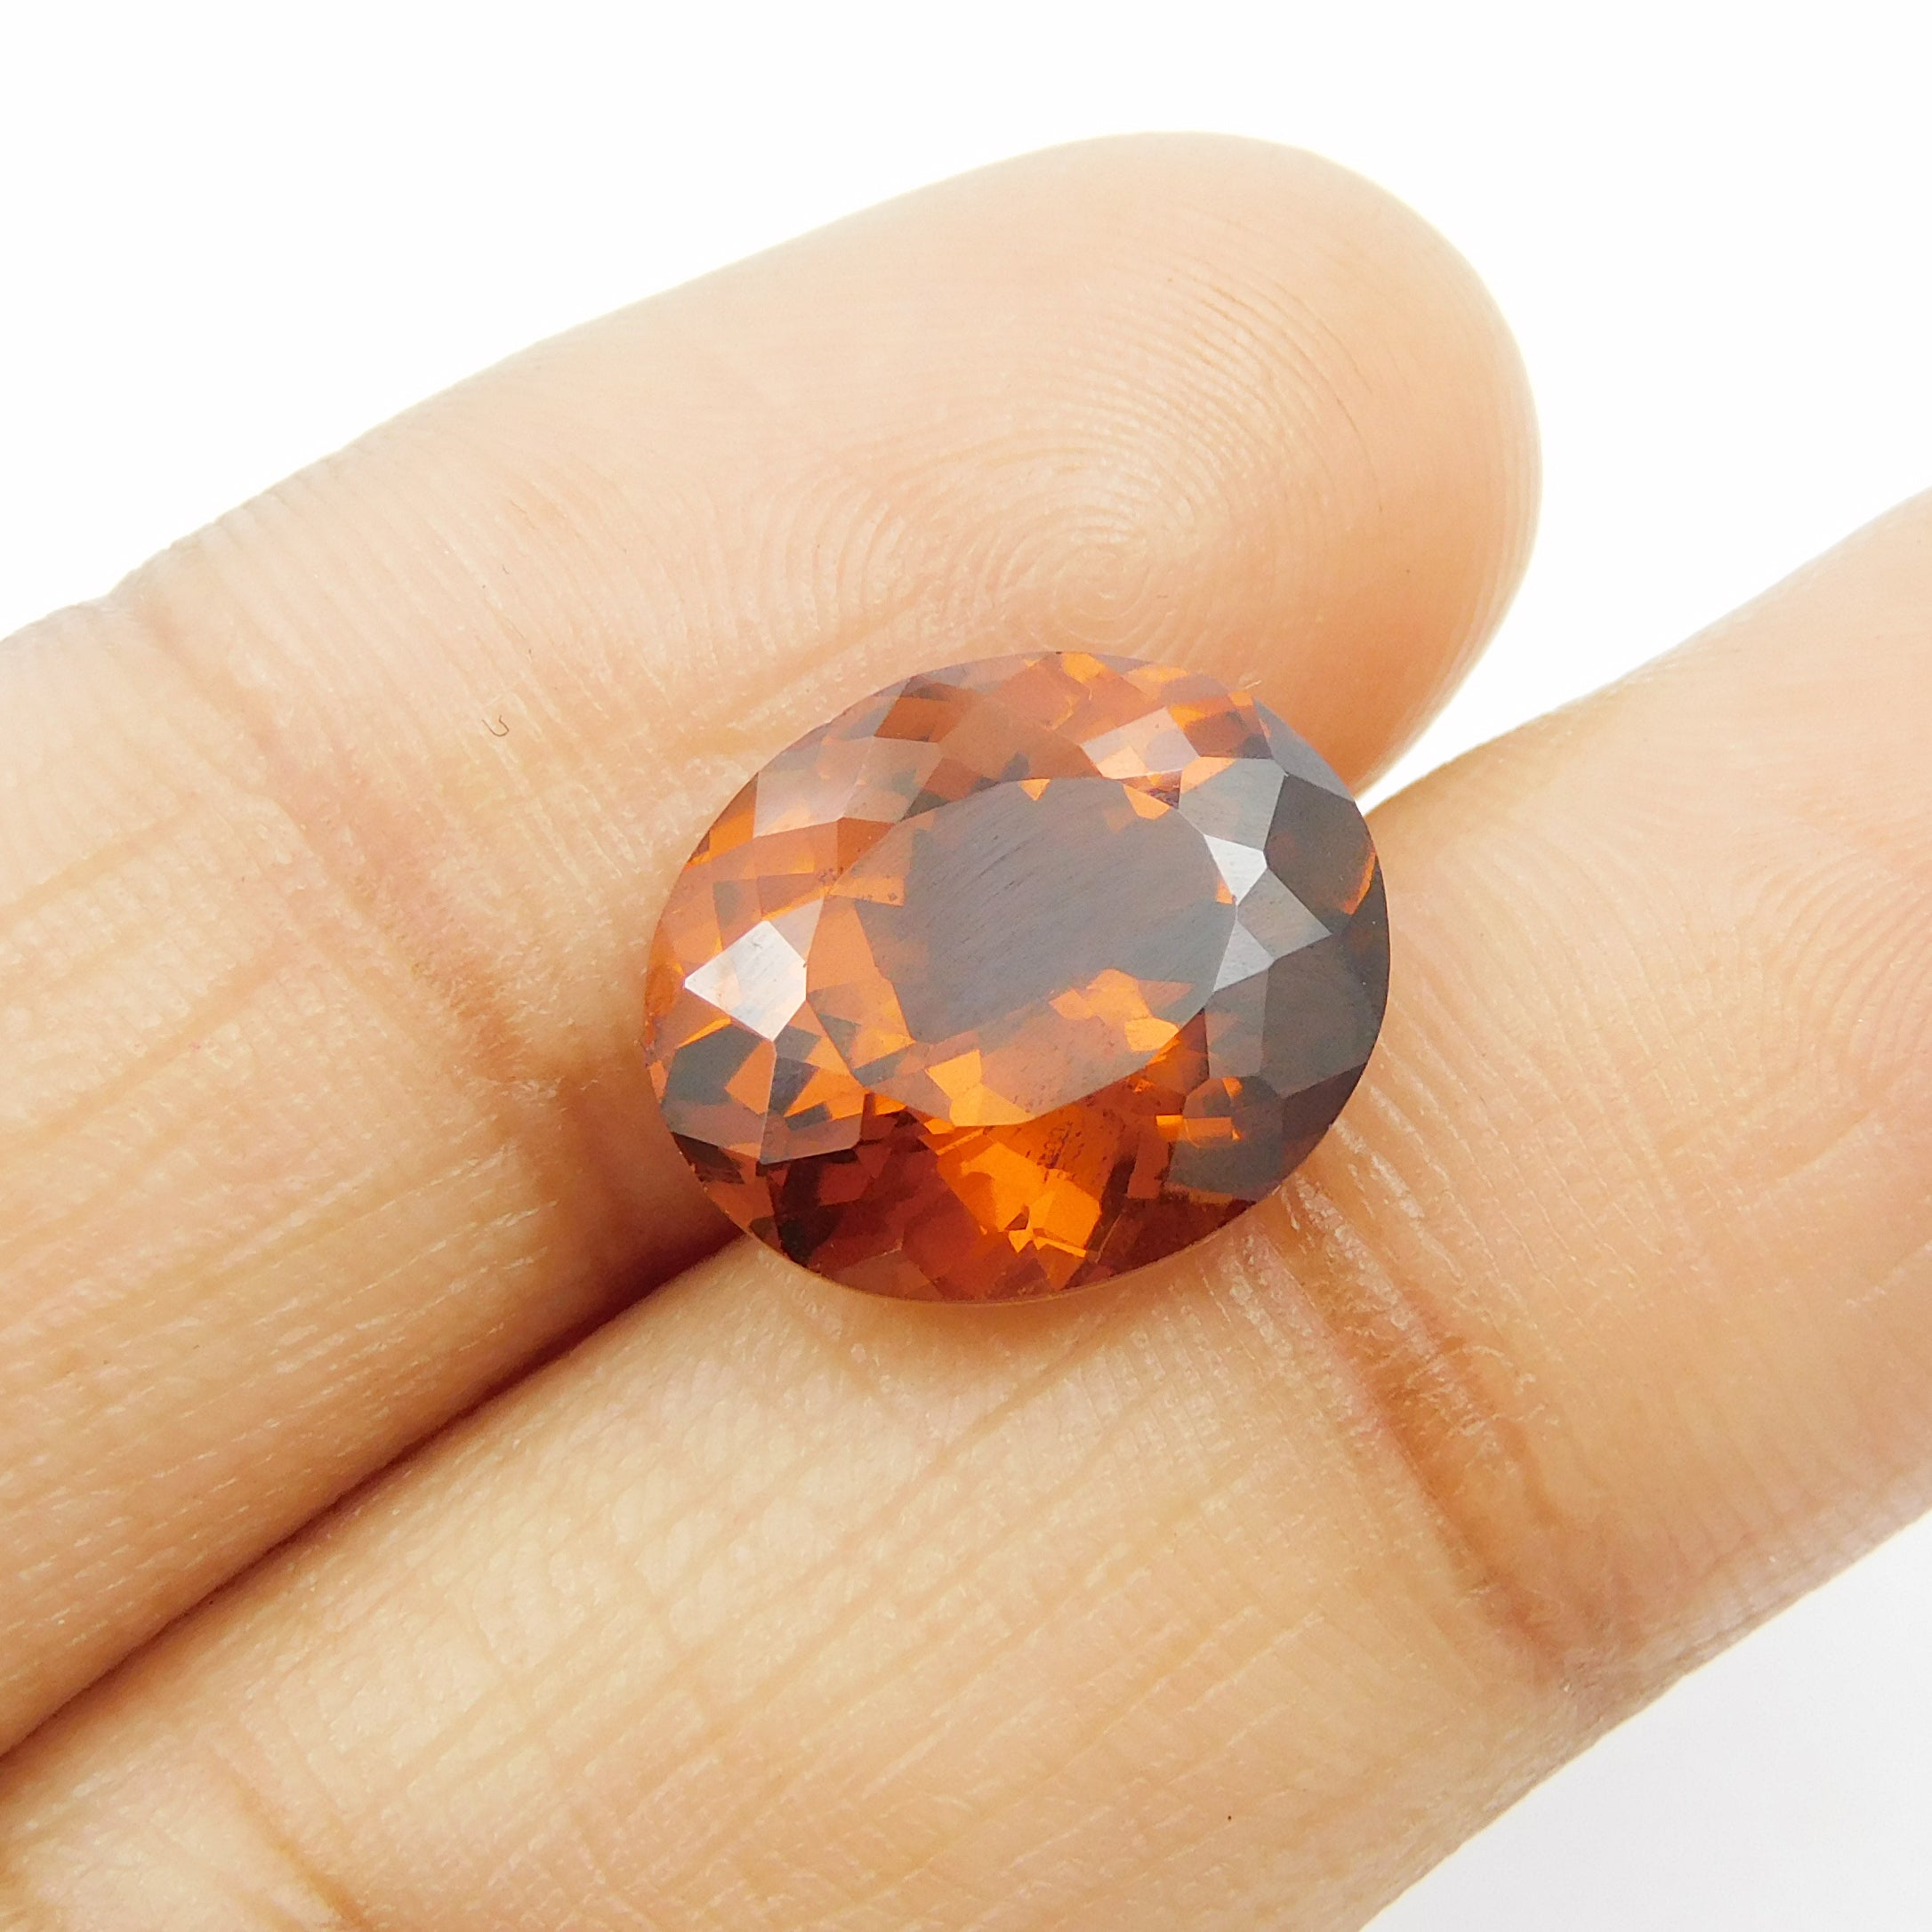 ON DEMAND !! Sapphire Necklace Natural Certified Oval Cut 9.37 Carat Orange Color Ceylon Sapphire Gemstone | For Sapphire Stone | Best Price